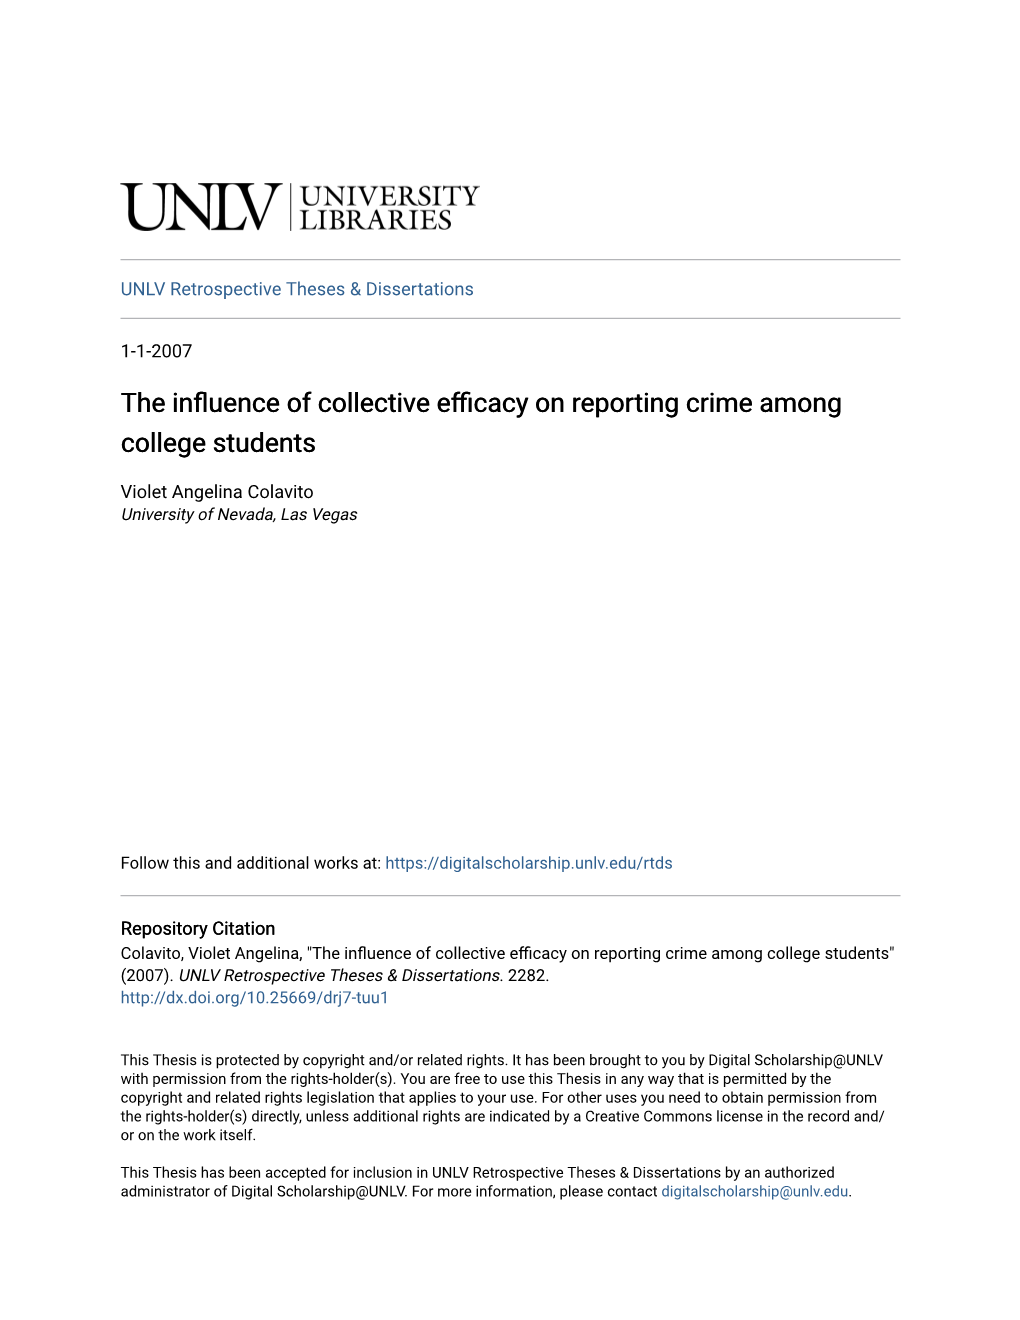 The Influence of Collective Efficacy on Reporting Crime Among College